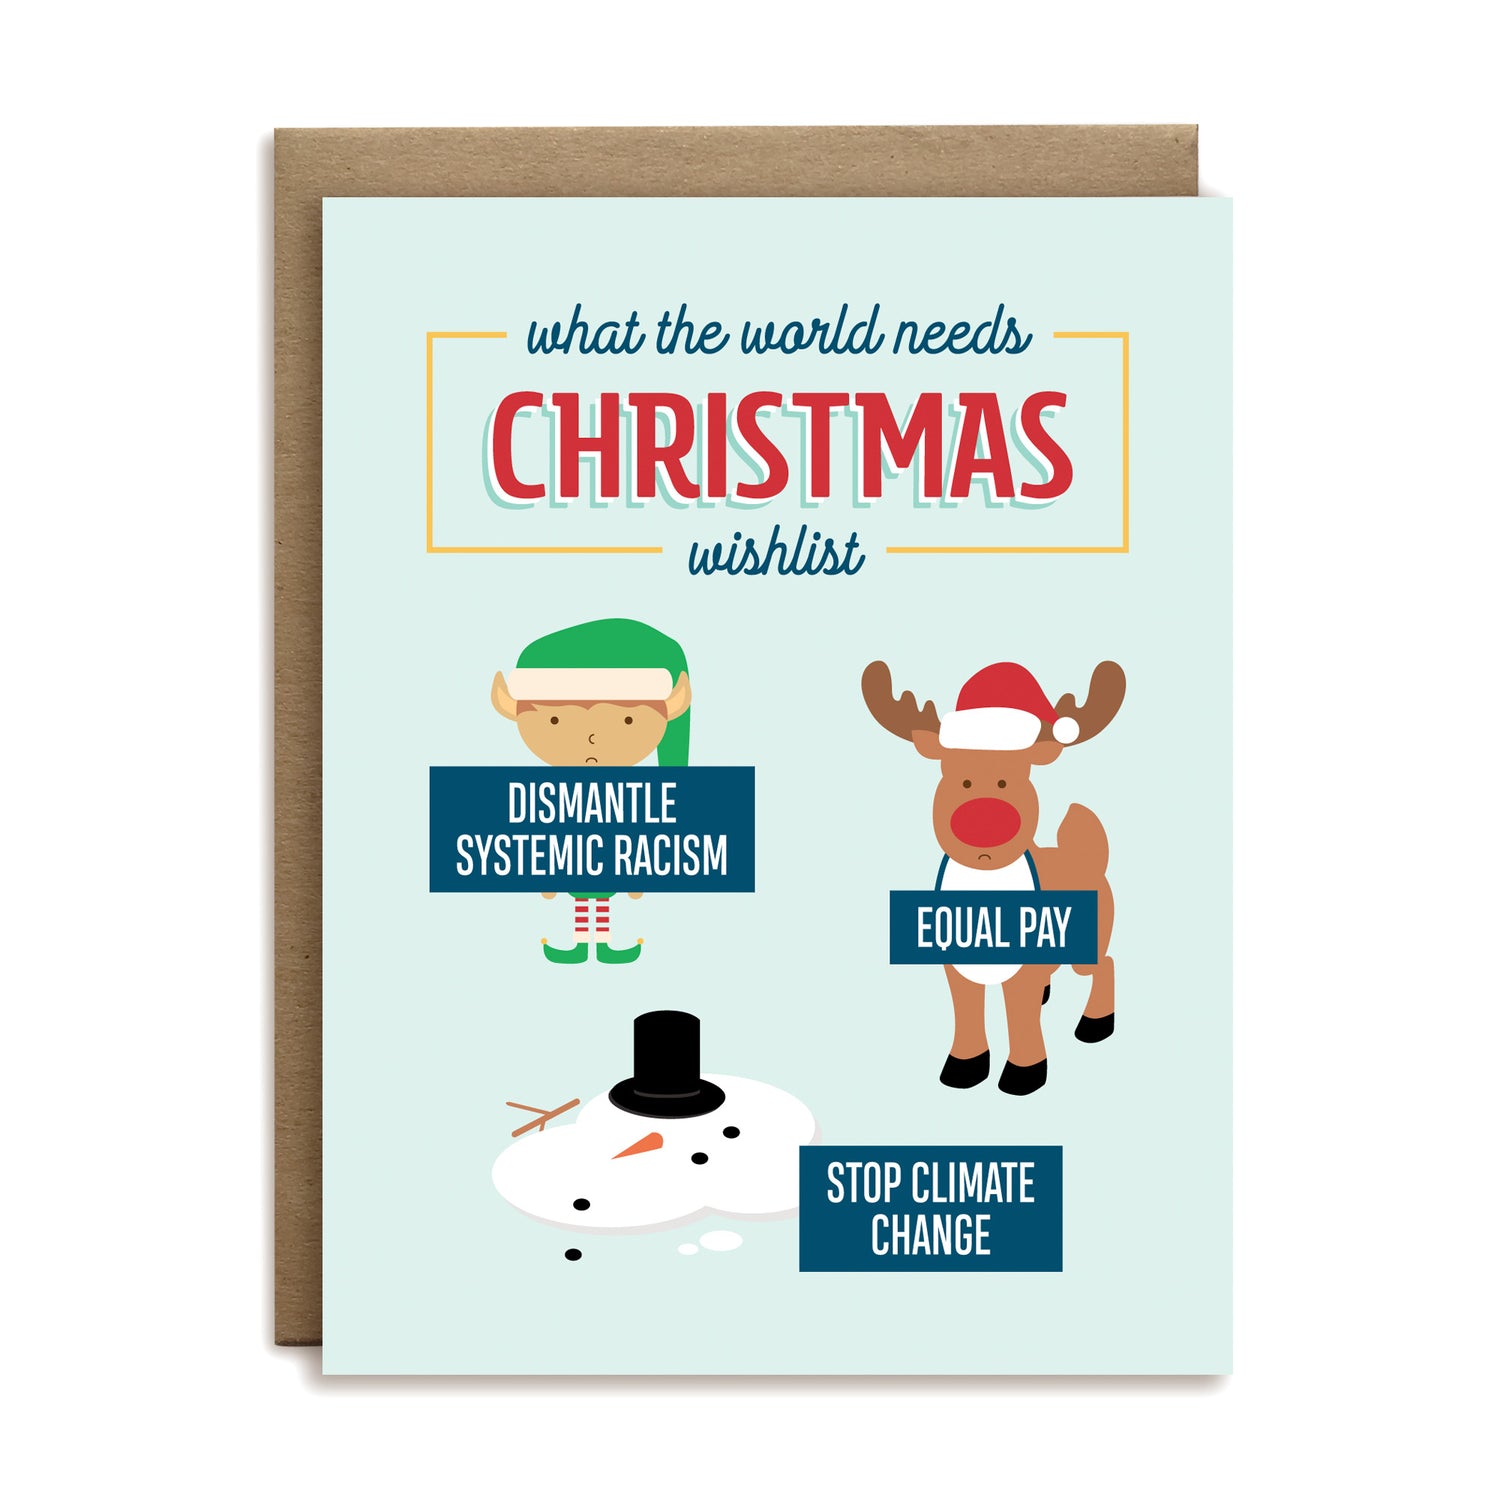 What the world needs Christmas wishlist, dismantle systemic racism, equal pay, stop climate change greeting card by I’ll Know It When I See It